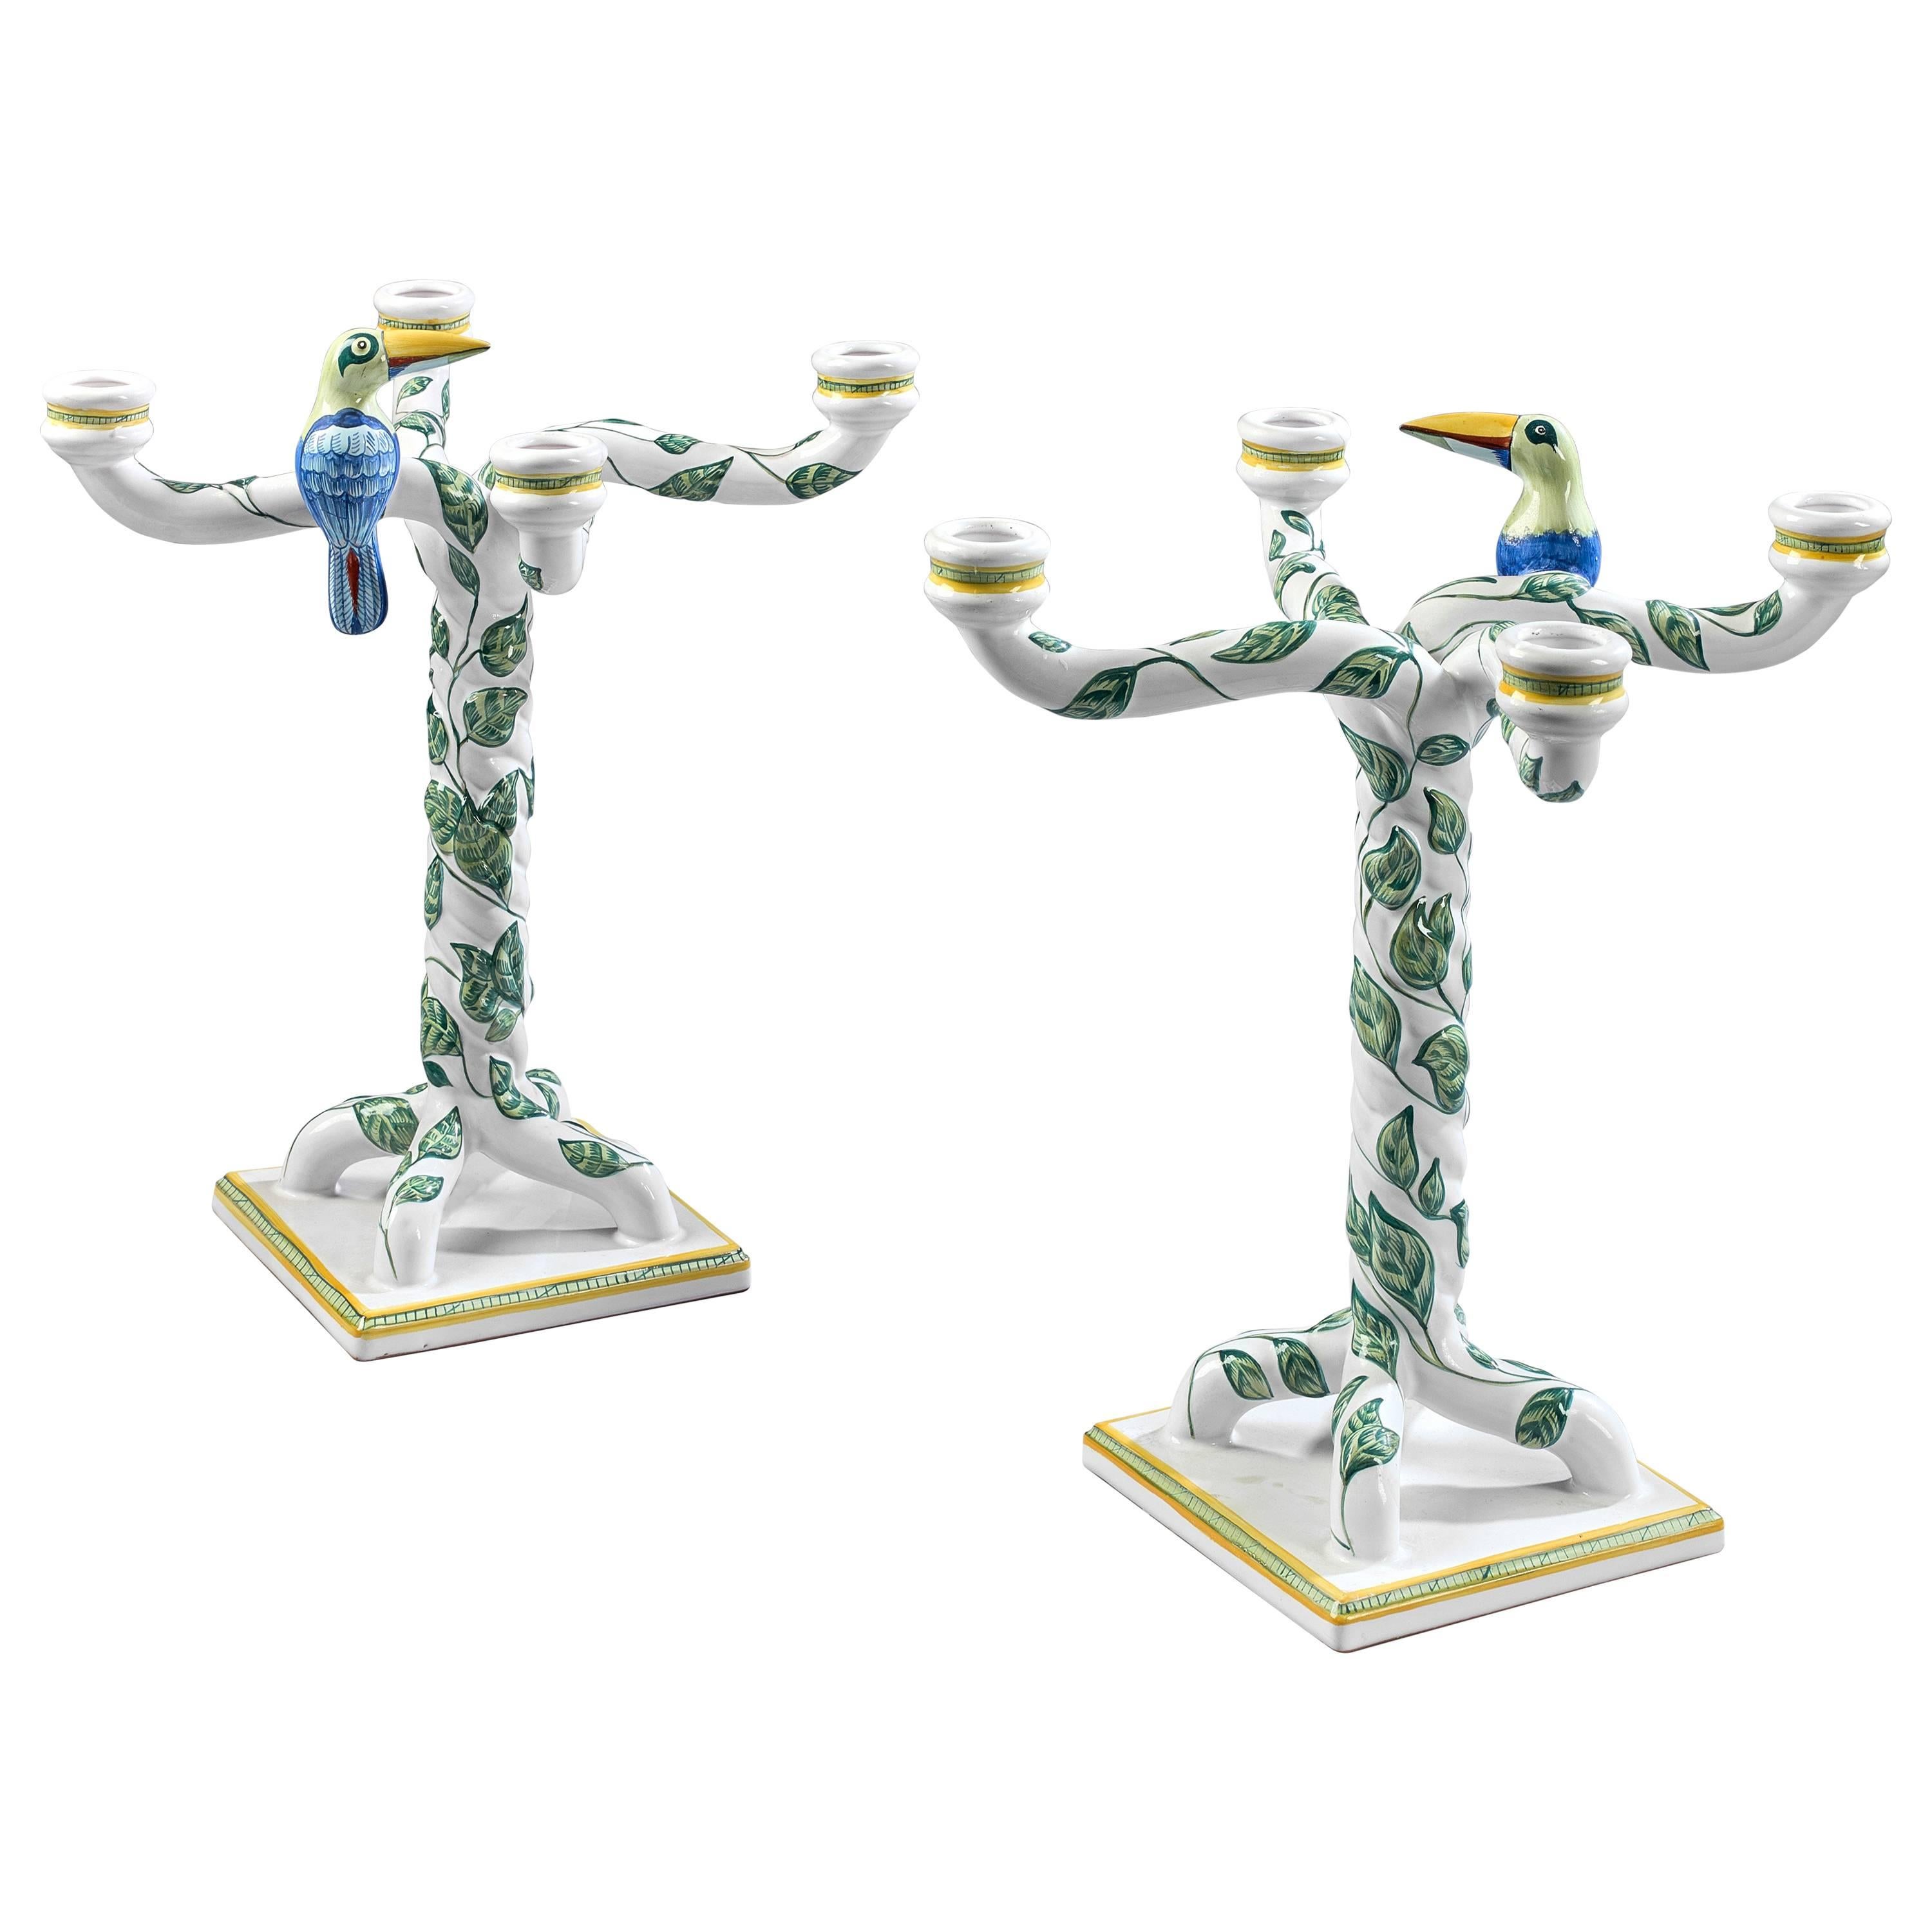 Hermes "Toucan" Pair of Four Branches Candelabra